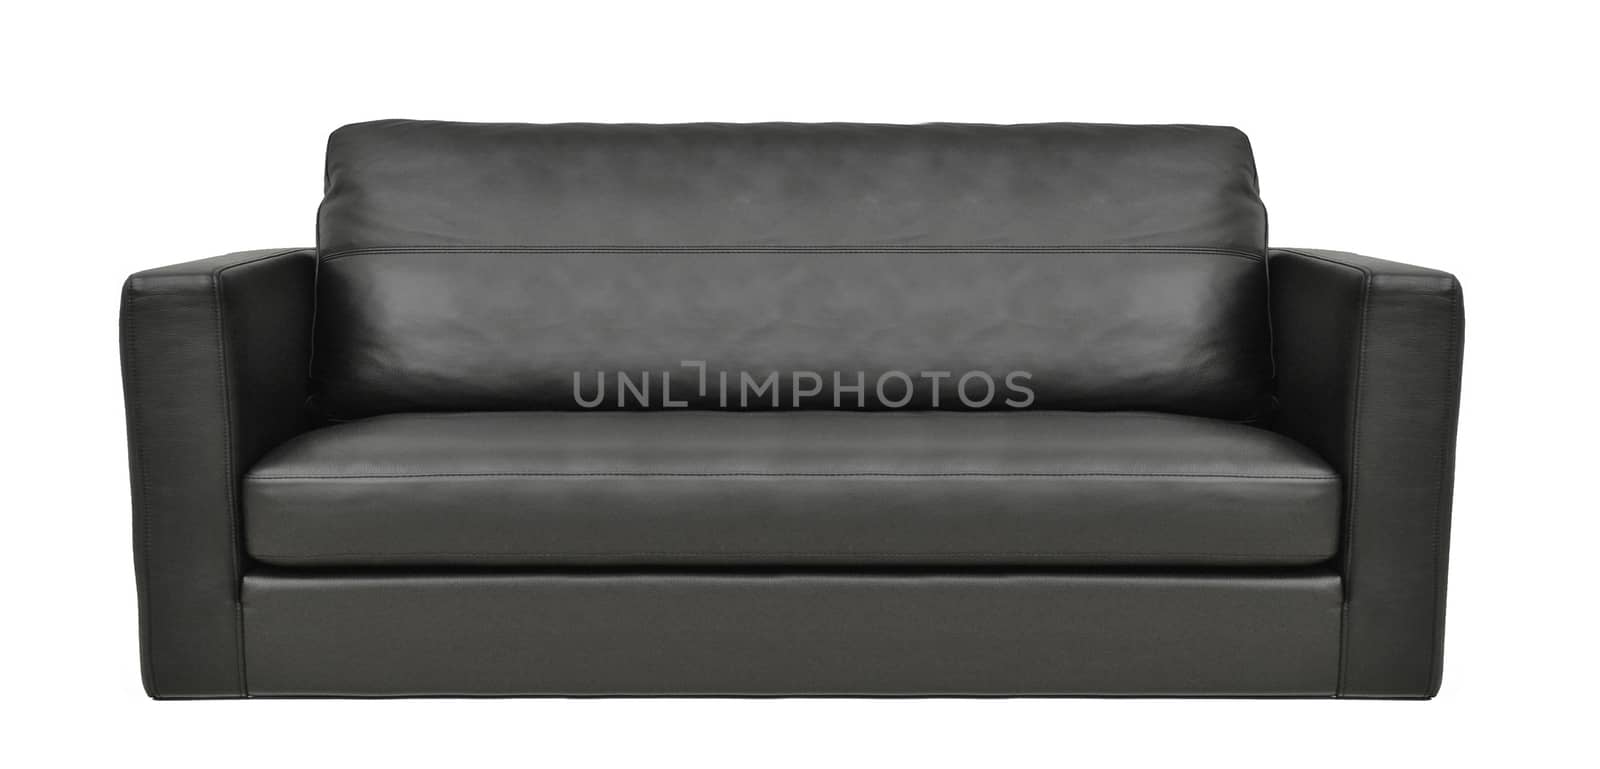 modern black leather sofa isolated by ozaiachin